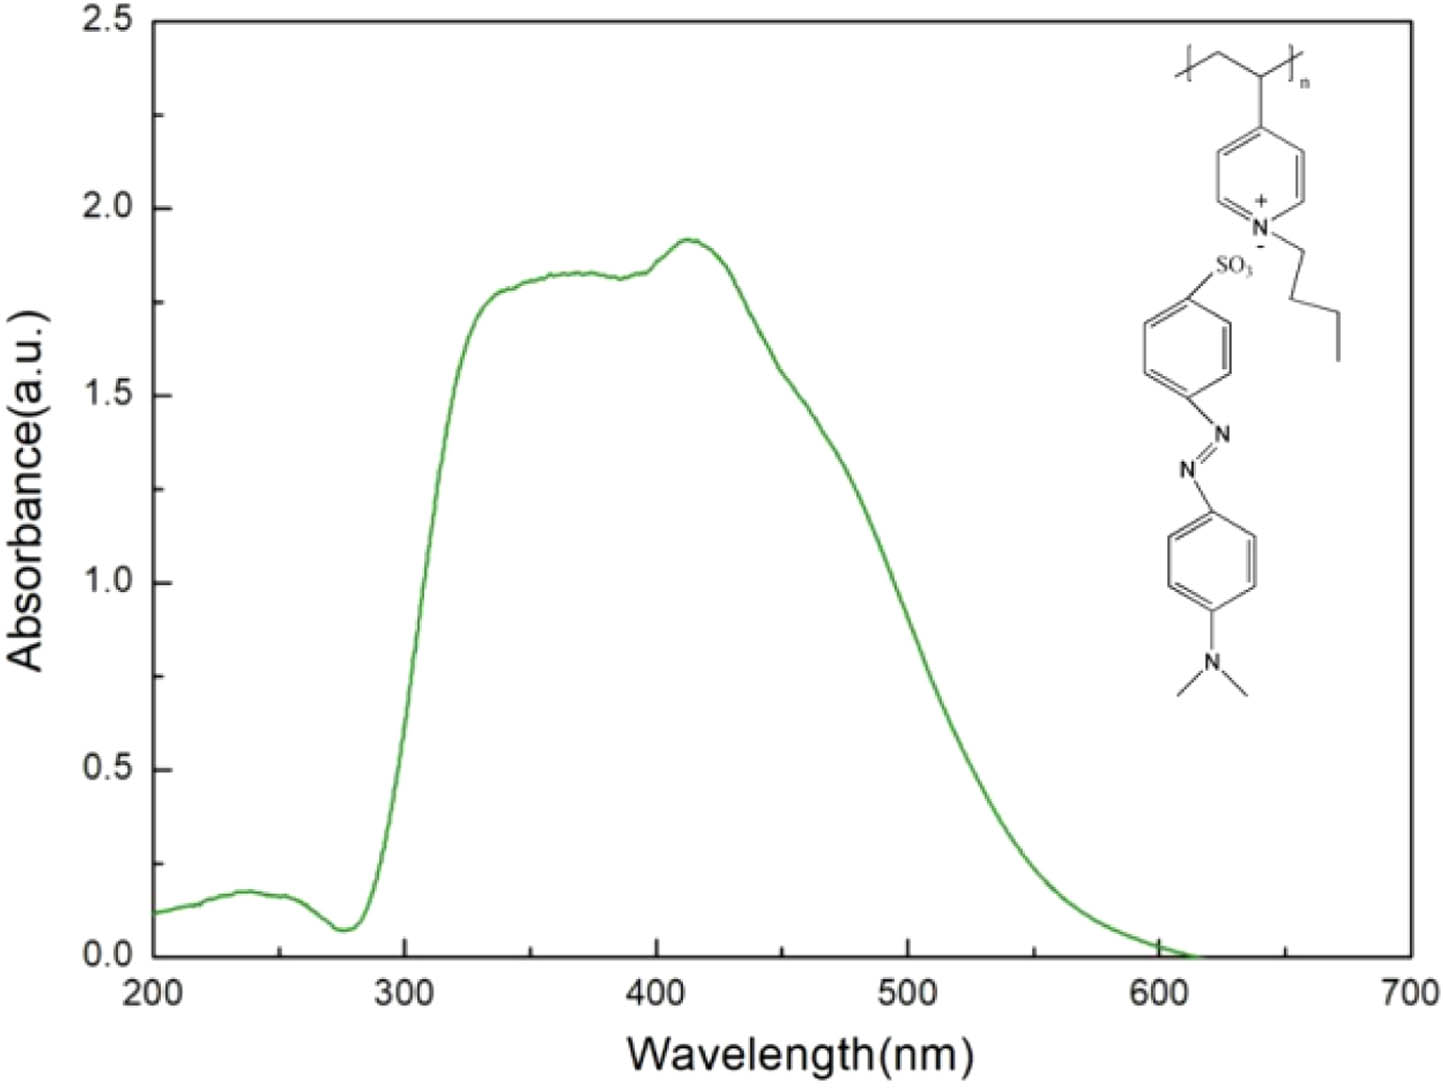 Absorption spectrum and molecular structure of self-assembled azobenzene liquid crystal film [33].